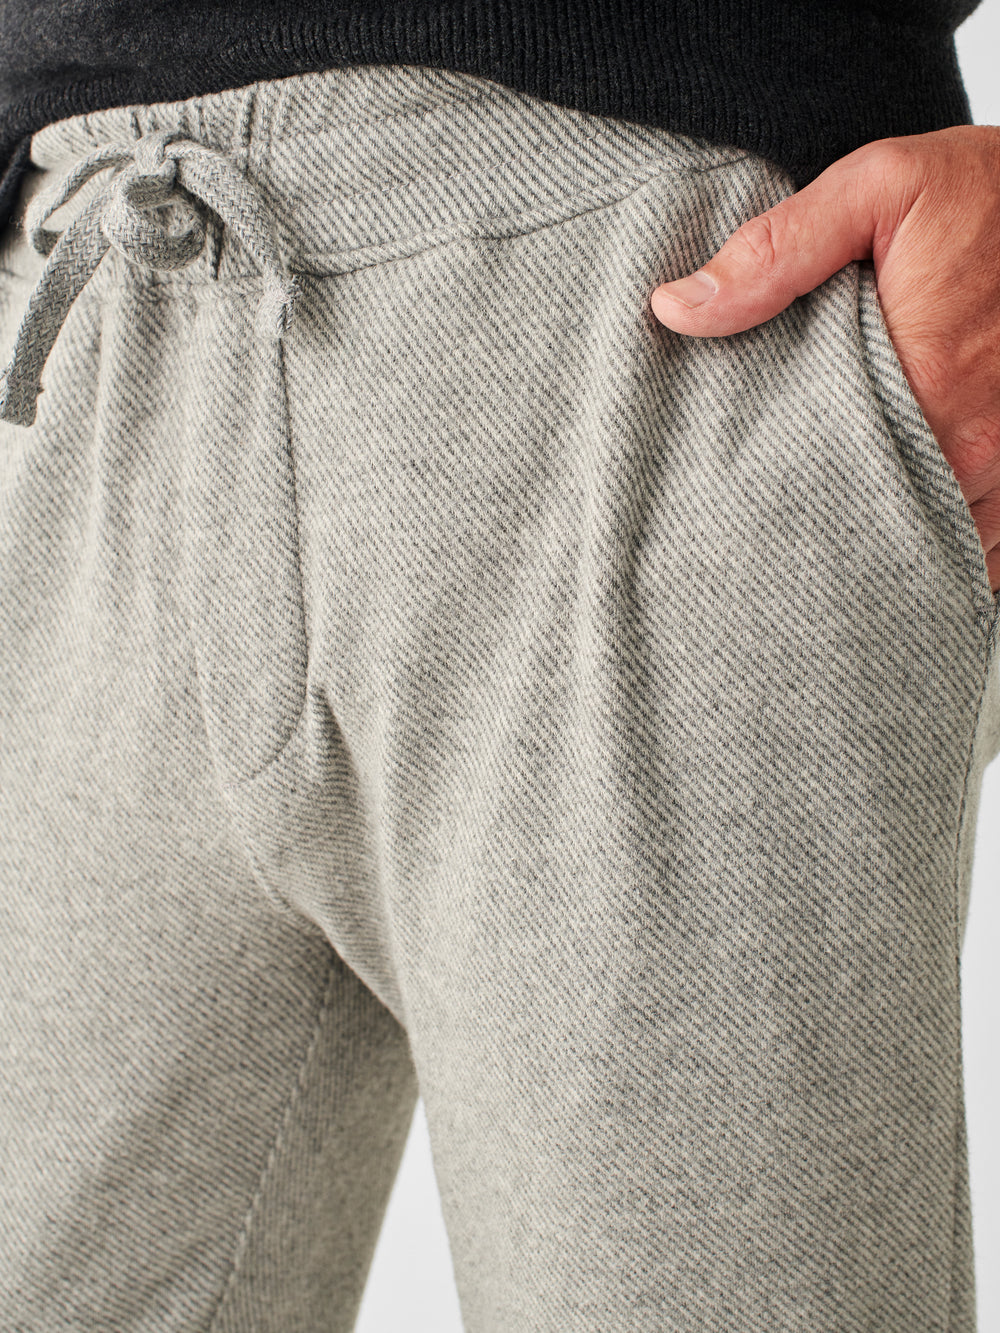 LEGEND SWEATPANT-FOSSIL GREY TWILL - Kingfisher Road - Online Boutique